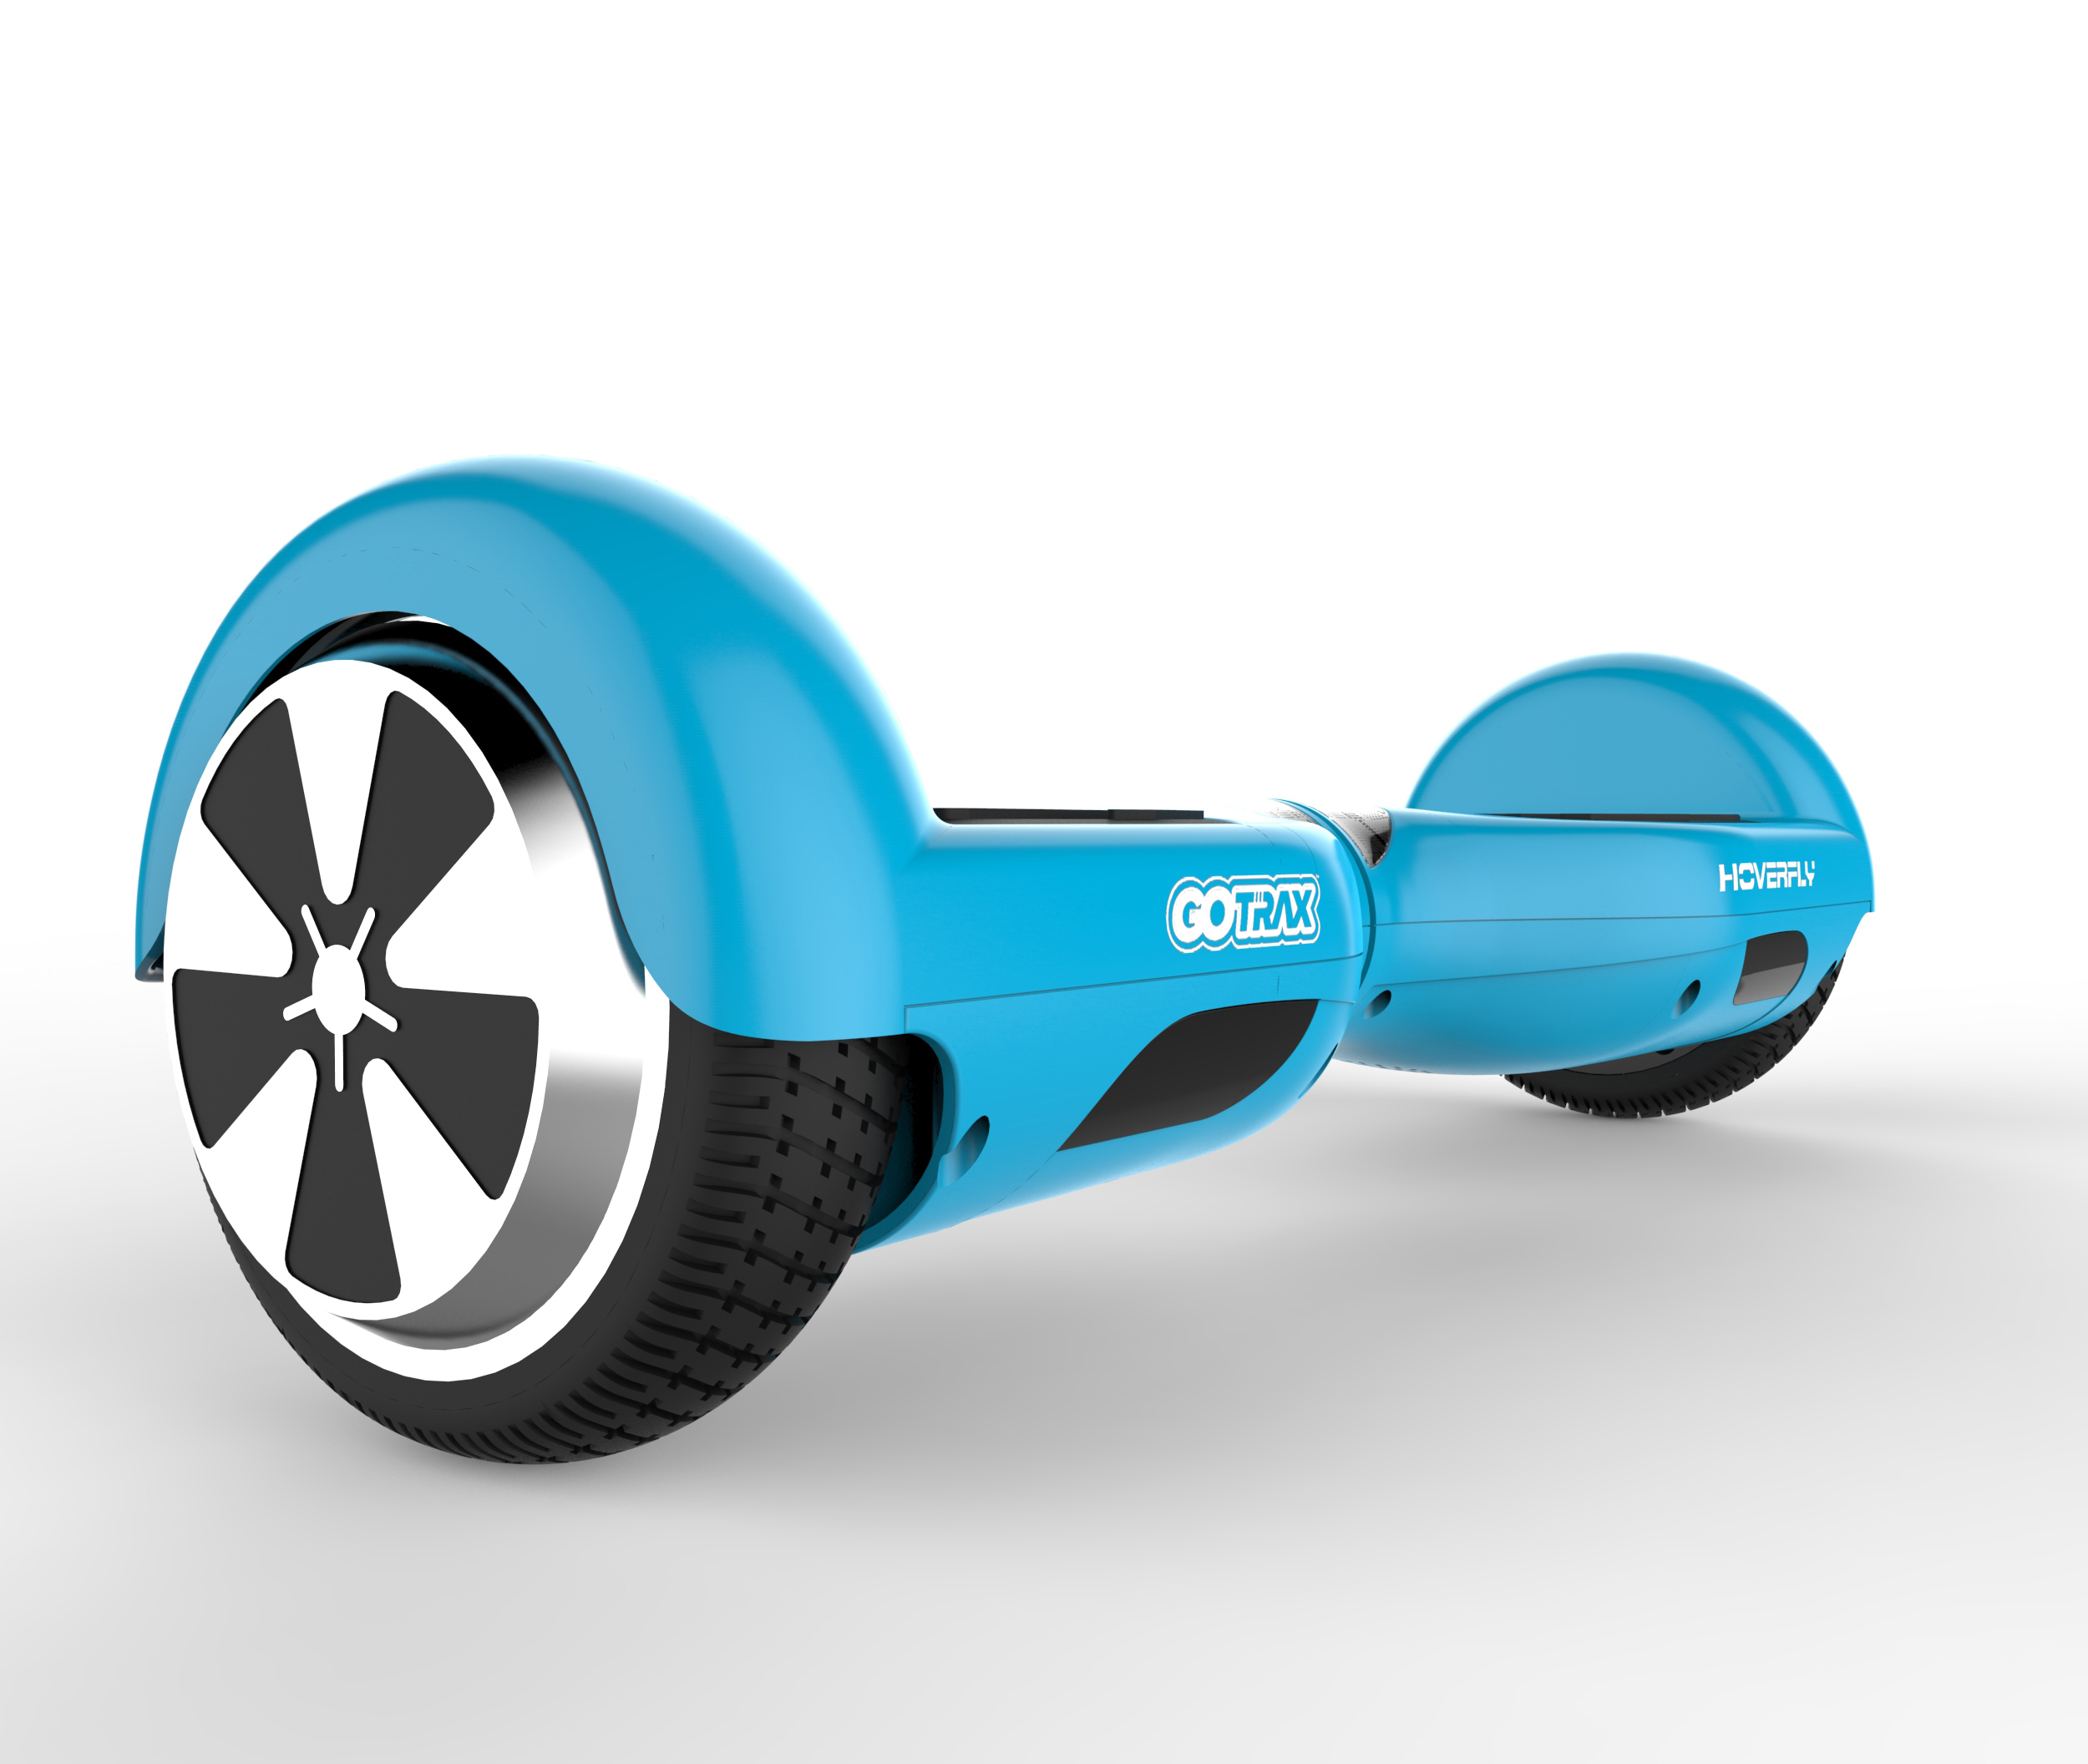 The GOTRAX HOVERFLY hoverboard is now only $169.